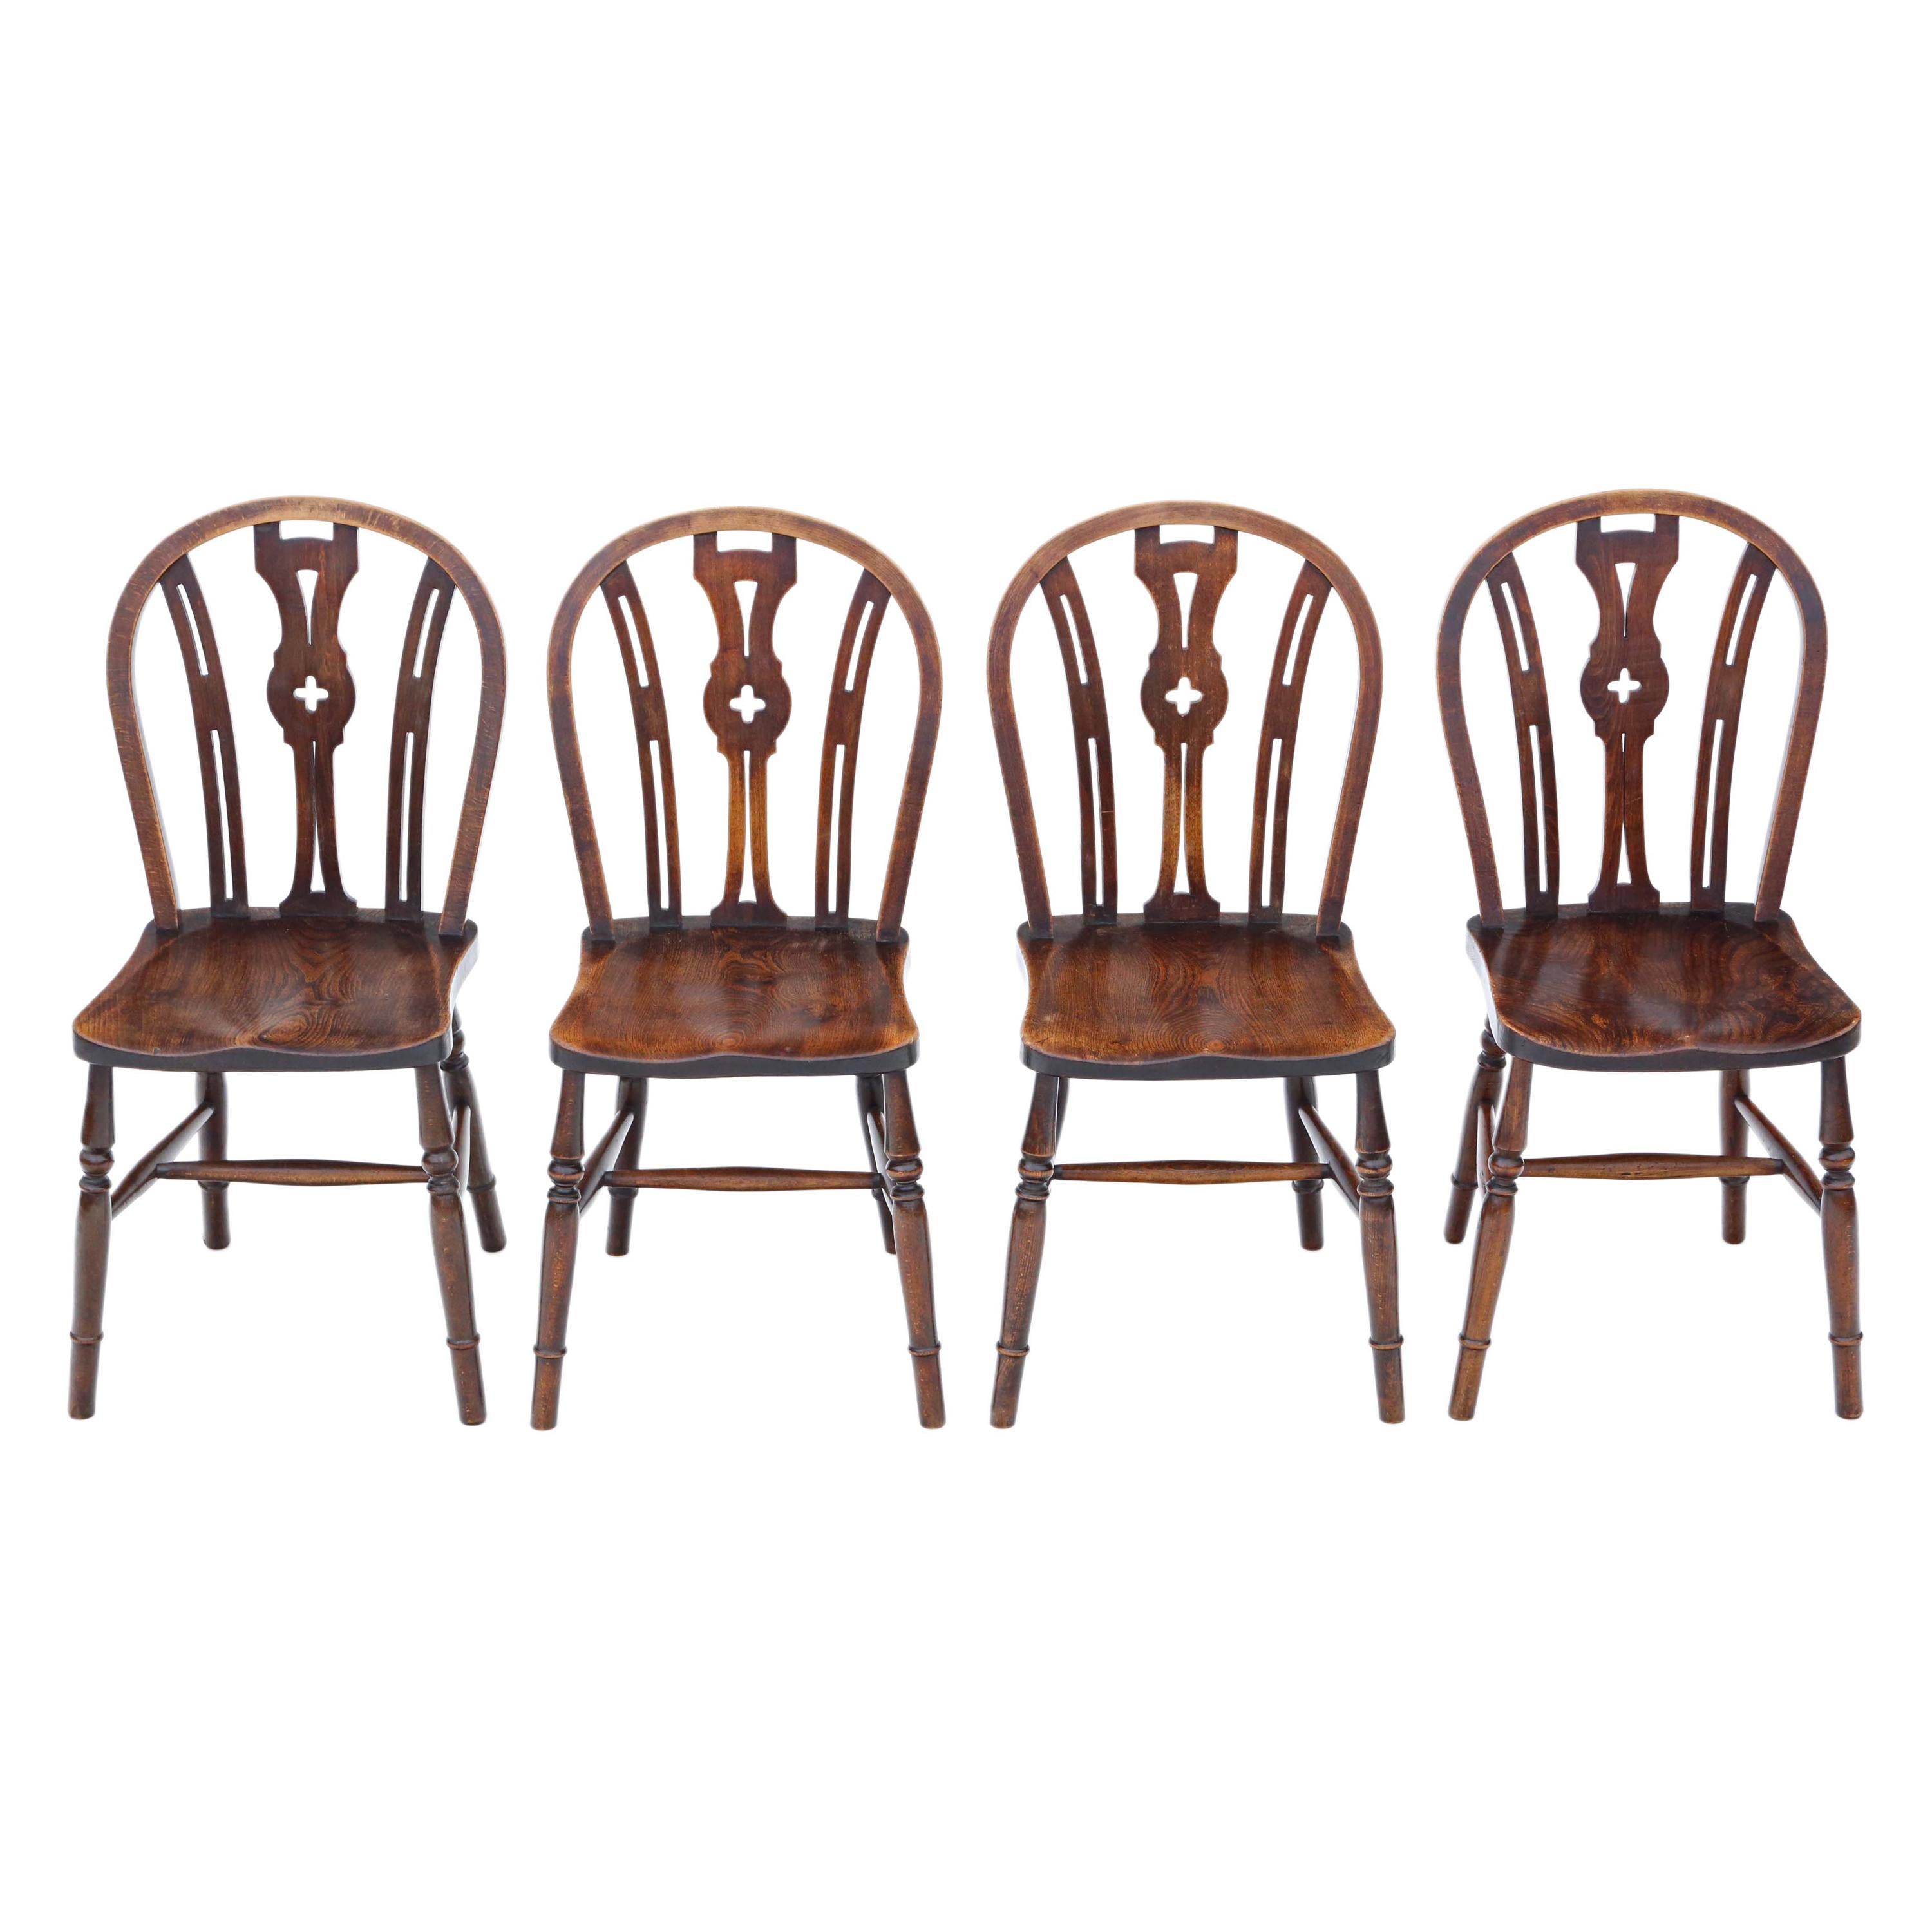 Antique Set of 4 Elm and Beech Kitchen Dining Chairs, C1900